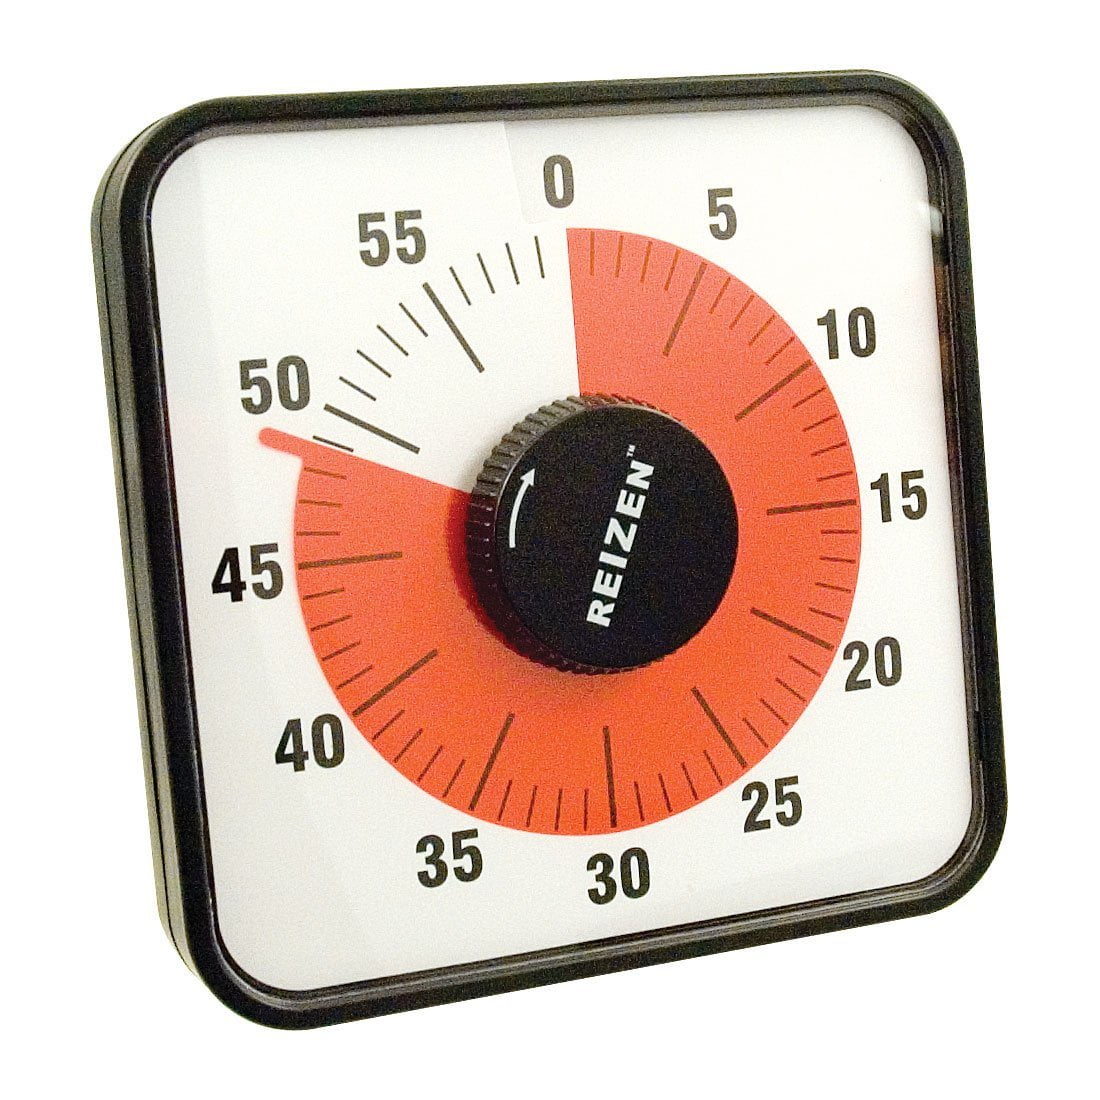 Magnetic Jumbo Timer, Disappearing red indicator visually depicts the passage of time with user-adjustable 1 to 60 minute timer By Reizen